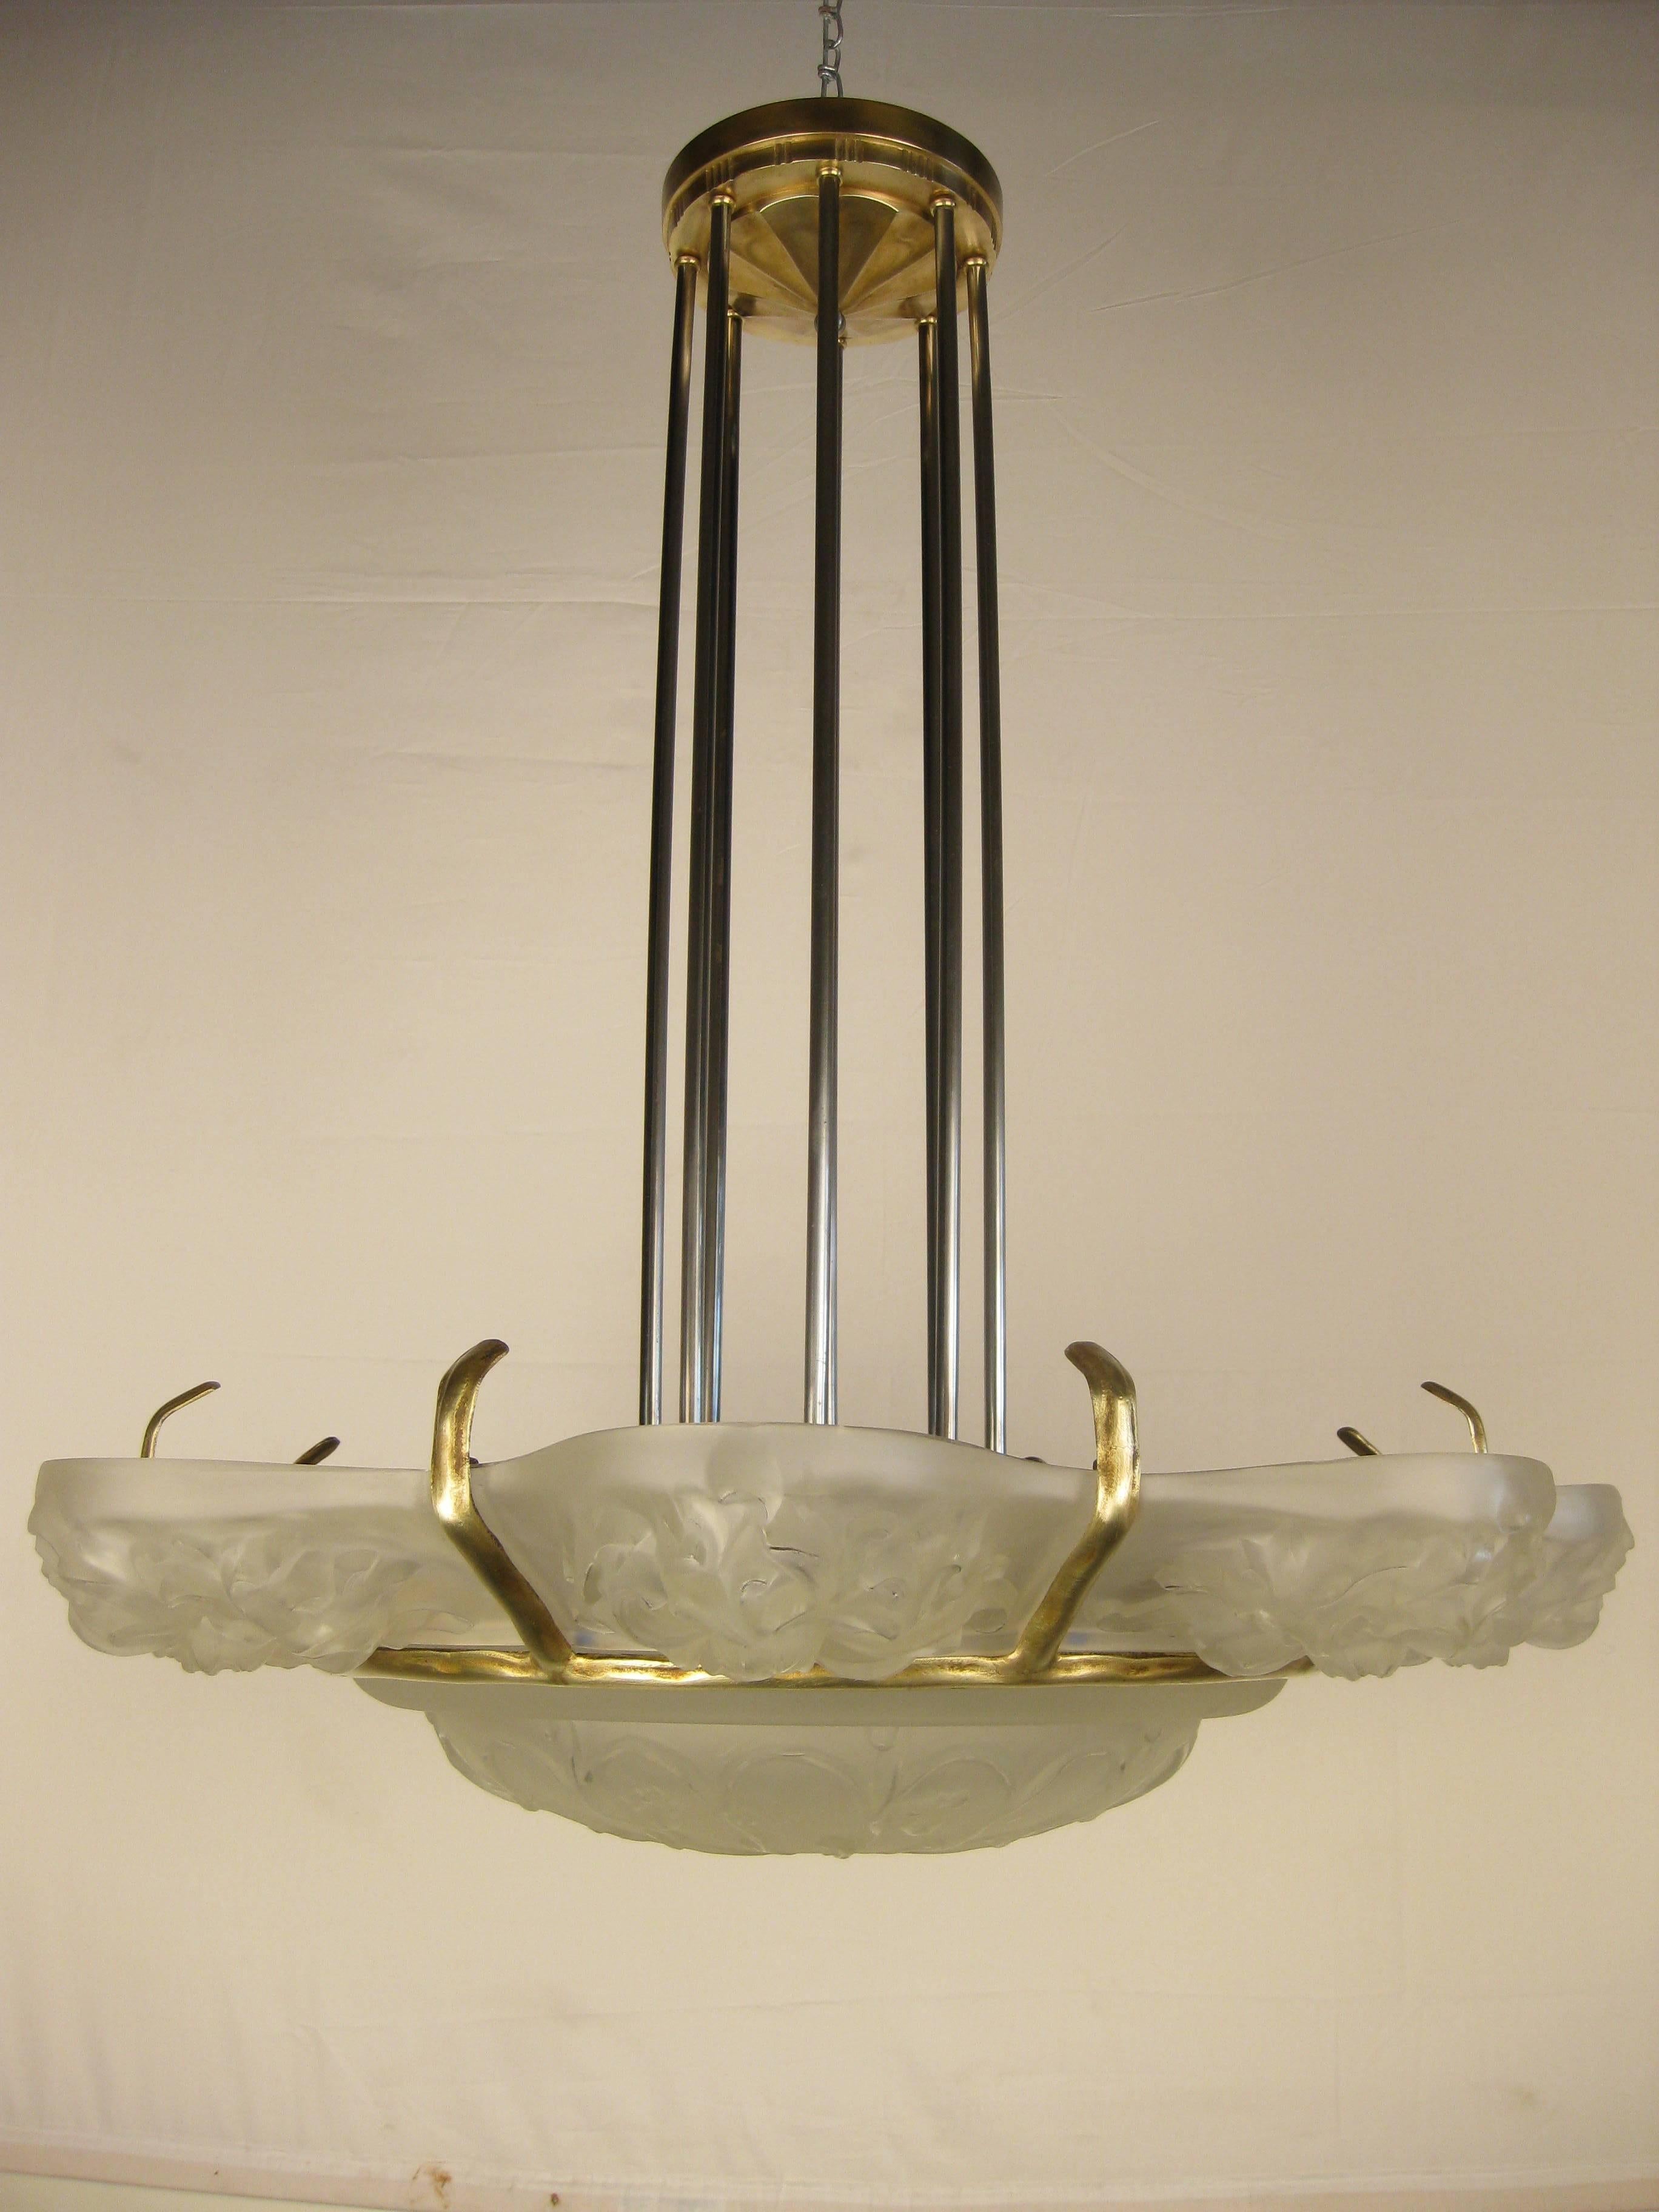 Stunning Grand scale French Art Deco chandelier was designed by the glass master 